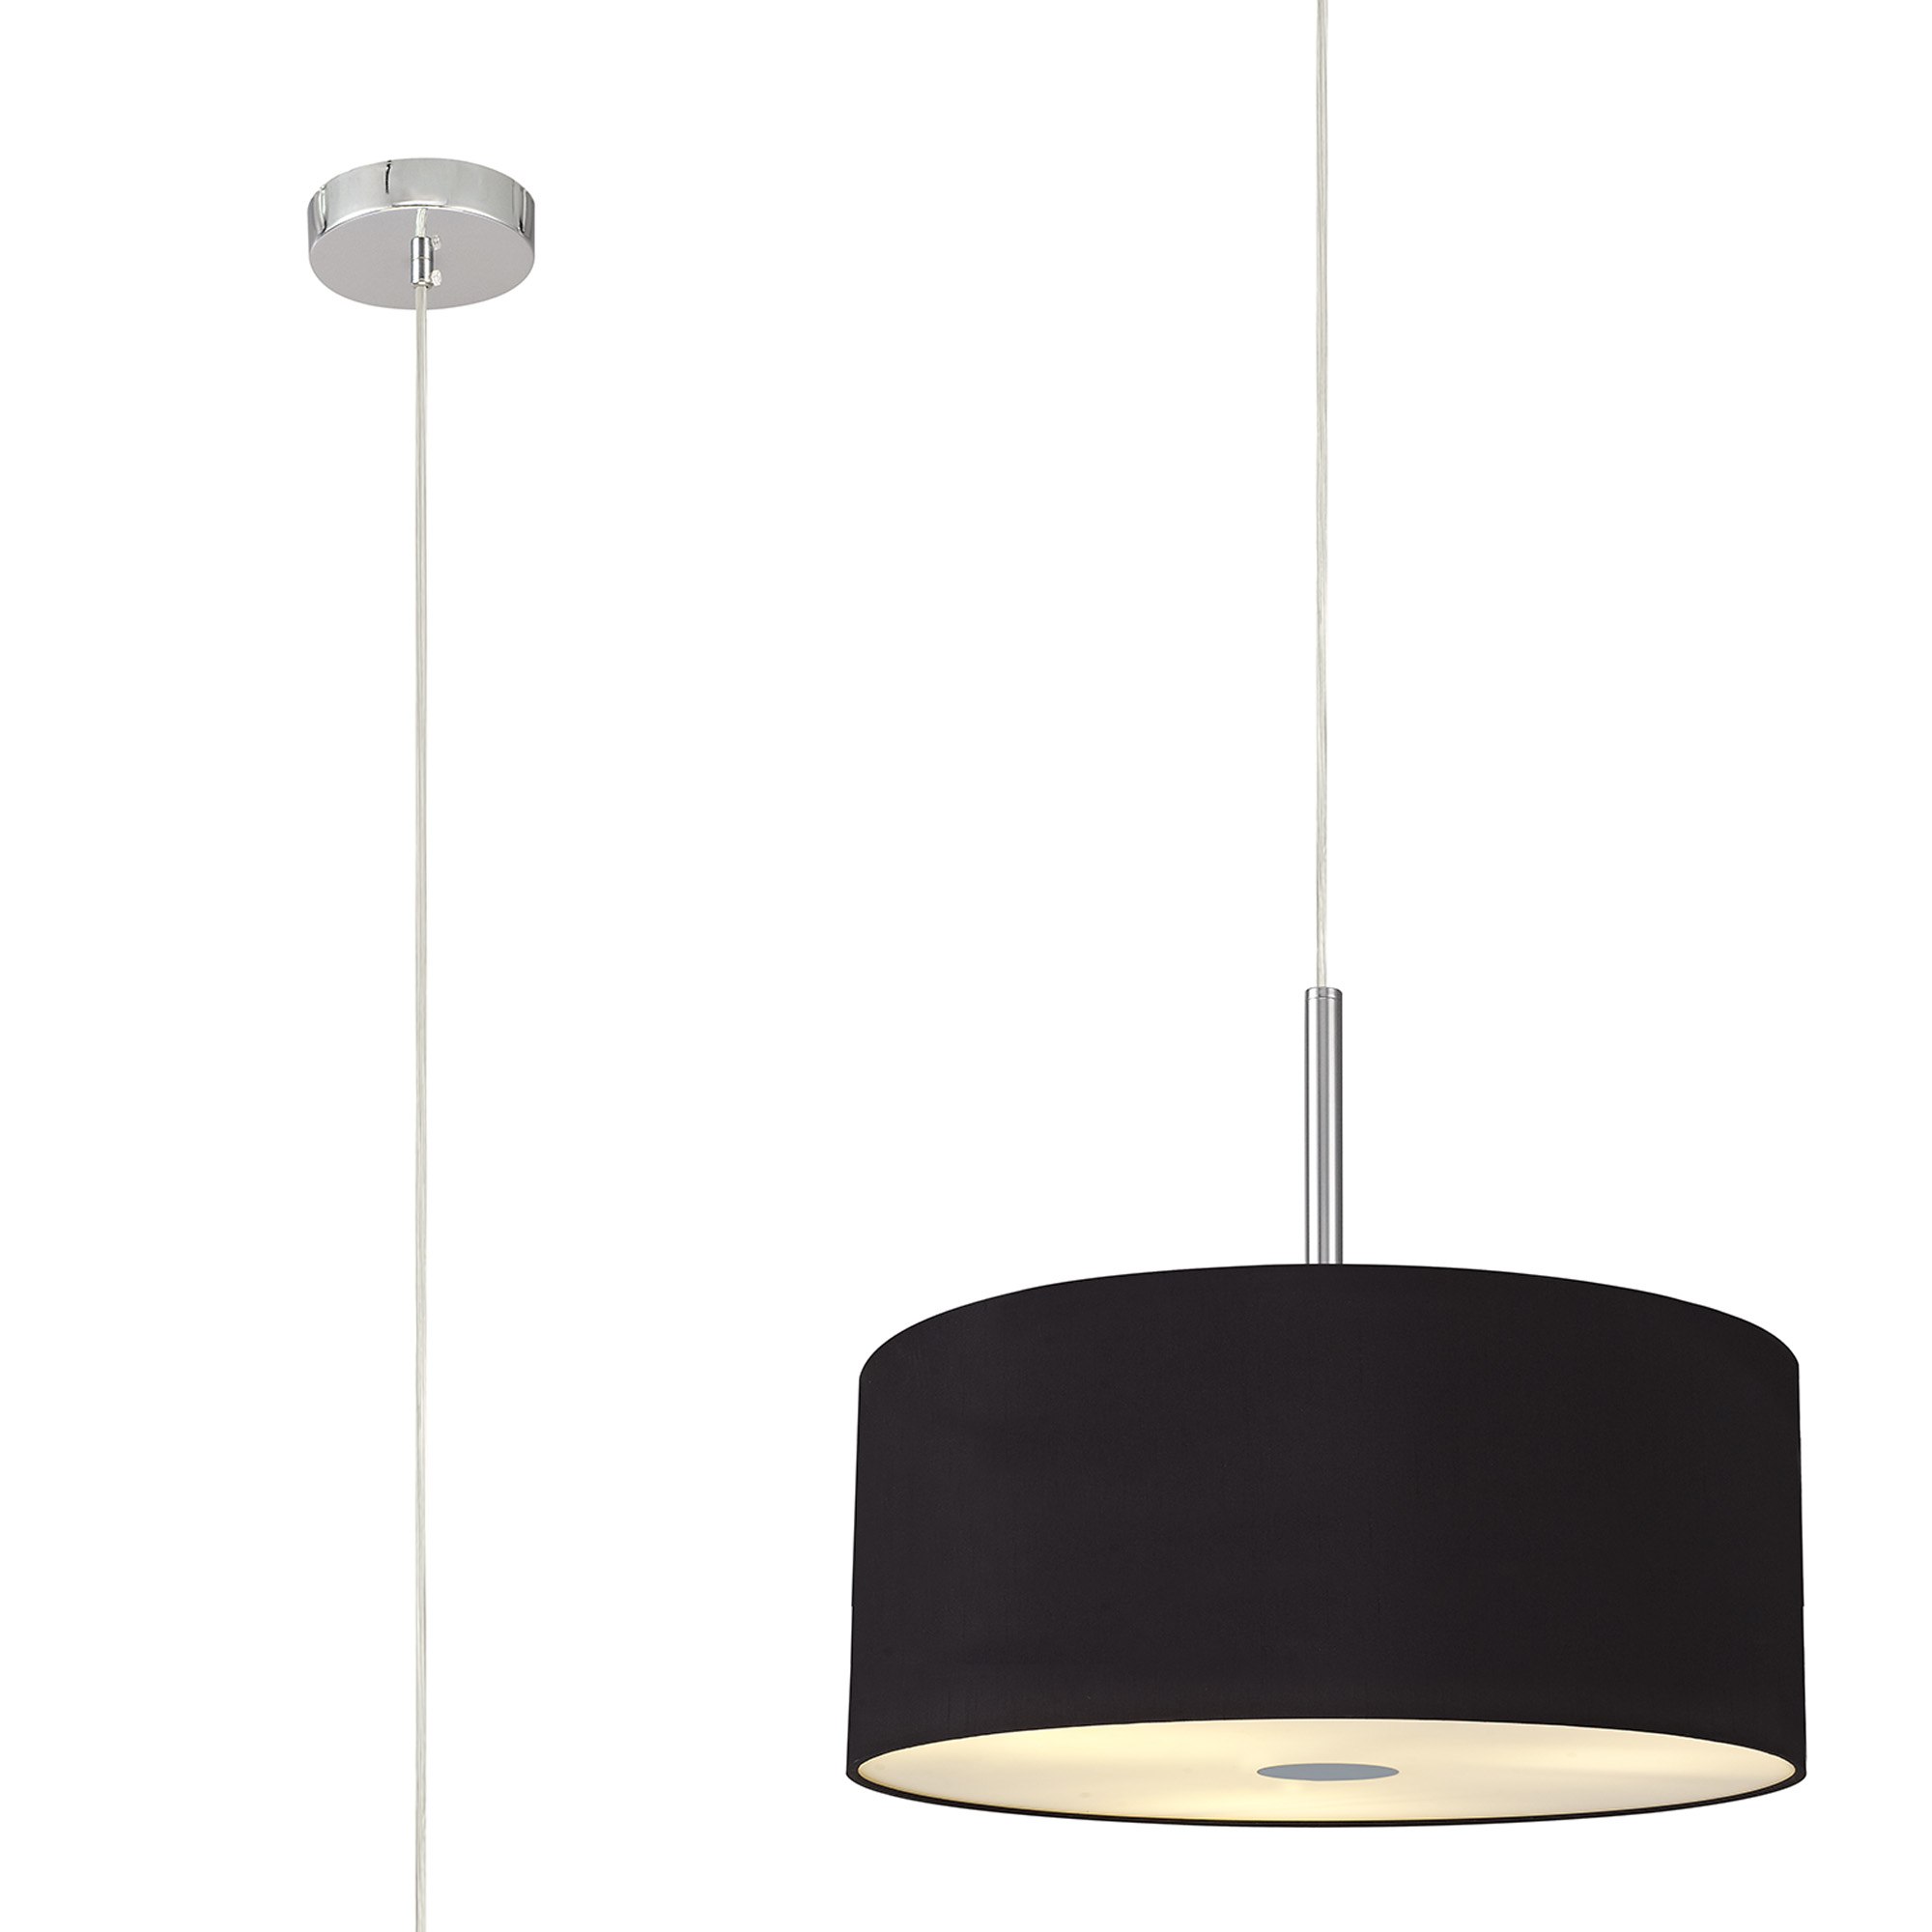 DK0471  Baymont 40cm 5 Light Pendant Polished Chrome, Midnight Black/Green Olive, Frosted Diffuser